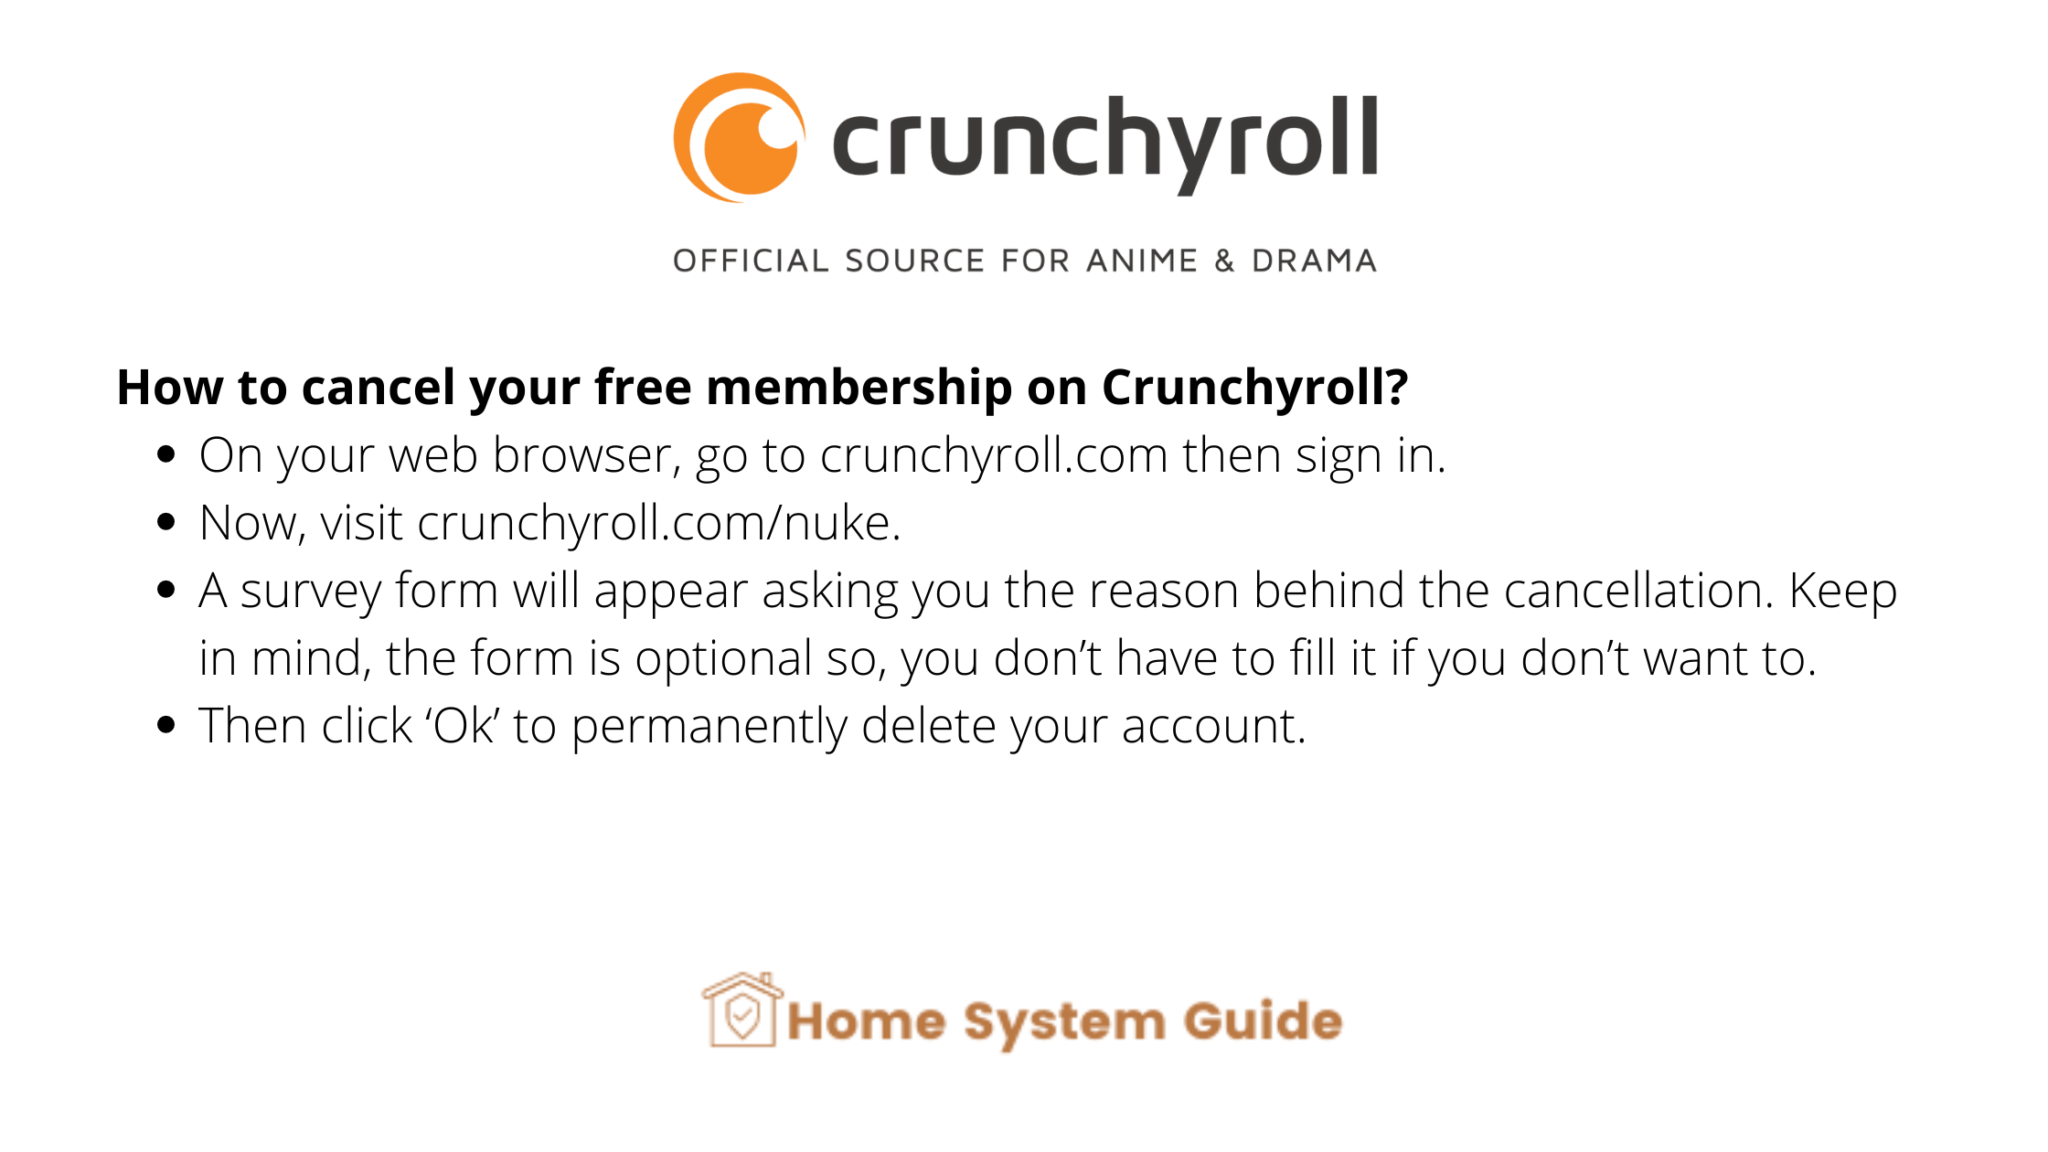 How To Activate And Deactivate Crunchyroll Subscription?